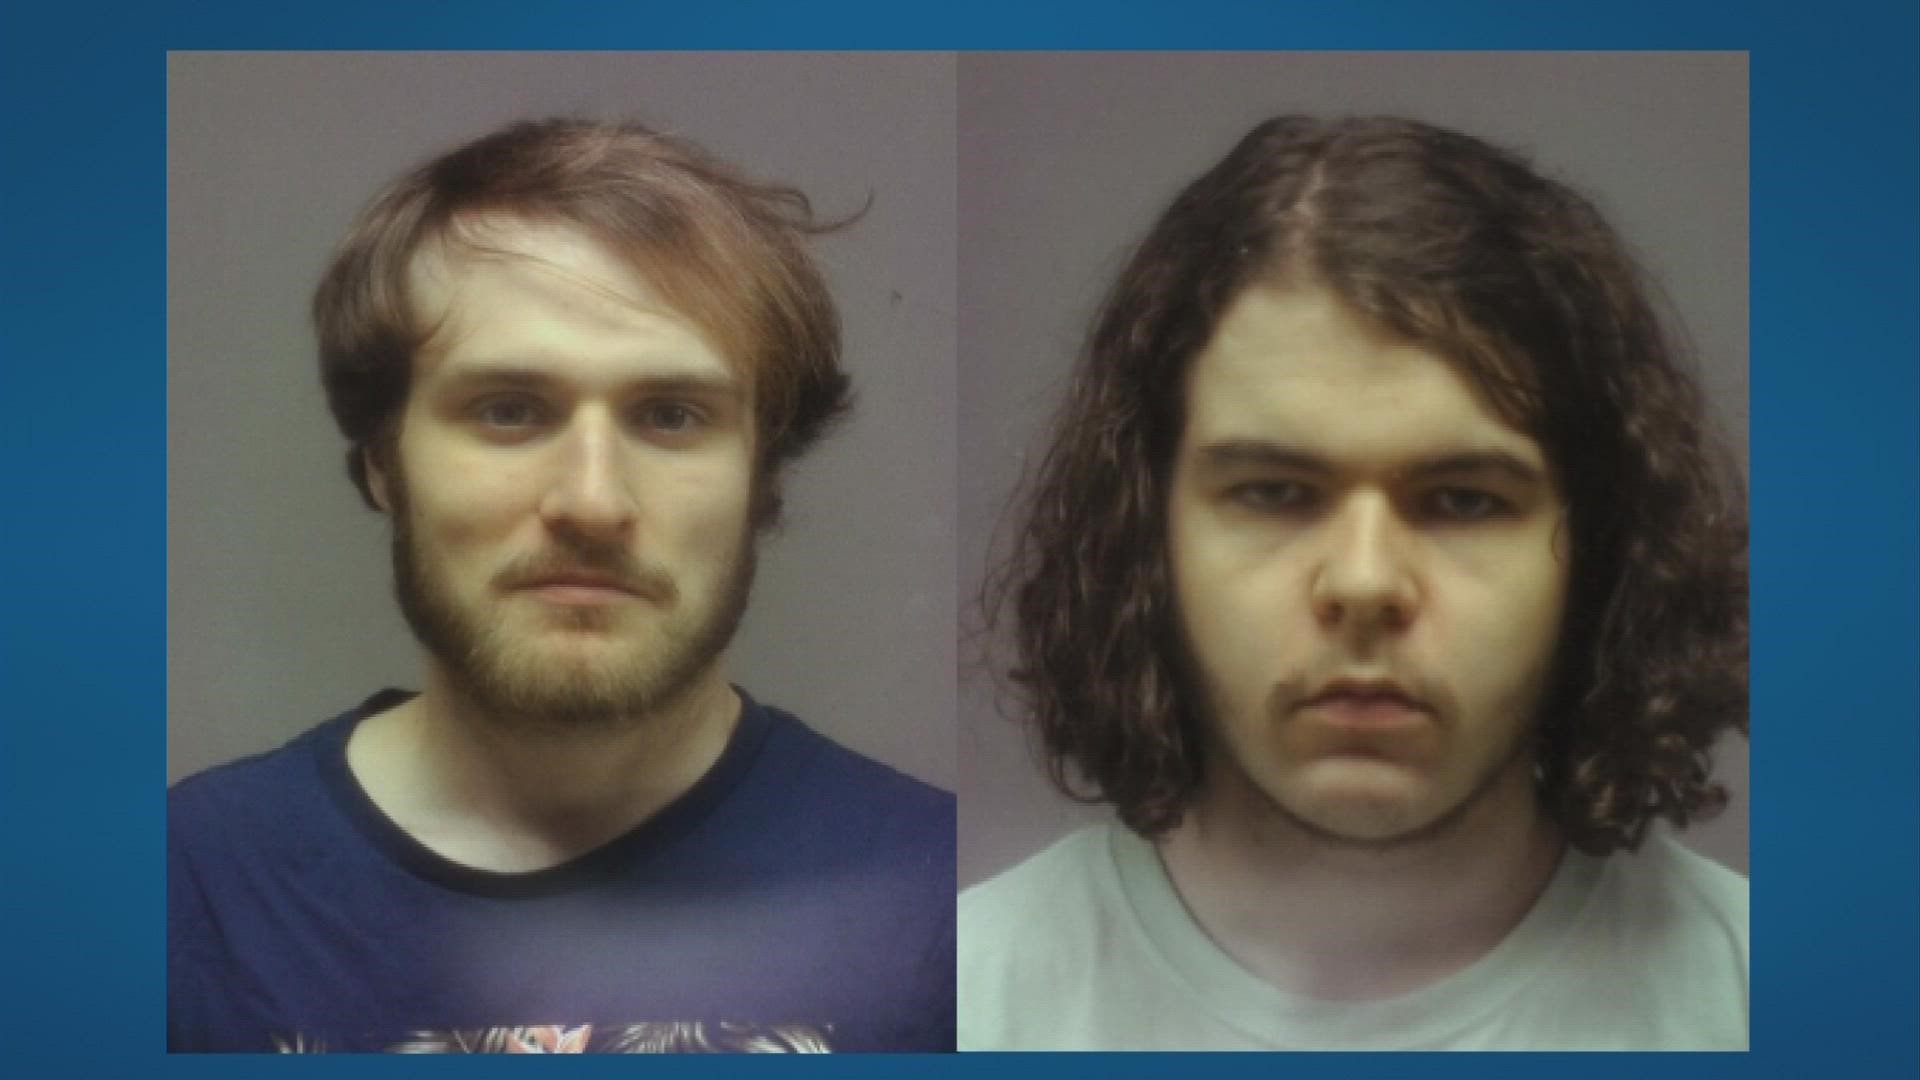 Benjamin Lieser and Brian Vincent, both 19 years old, were transported to a regional jail after being charged with allegedly sexually assaulting a minor.